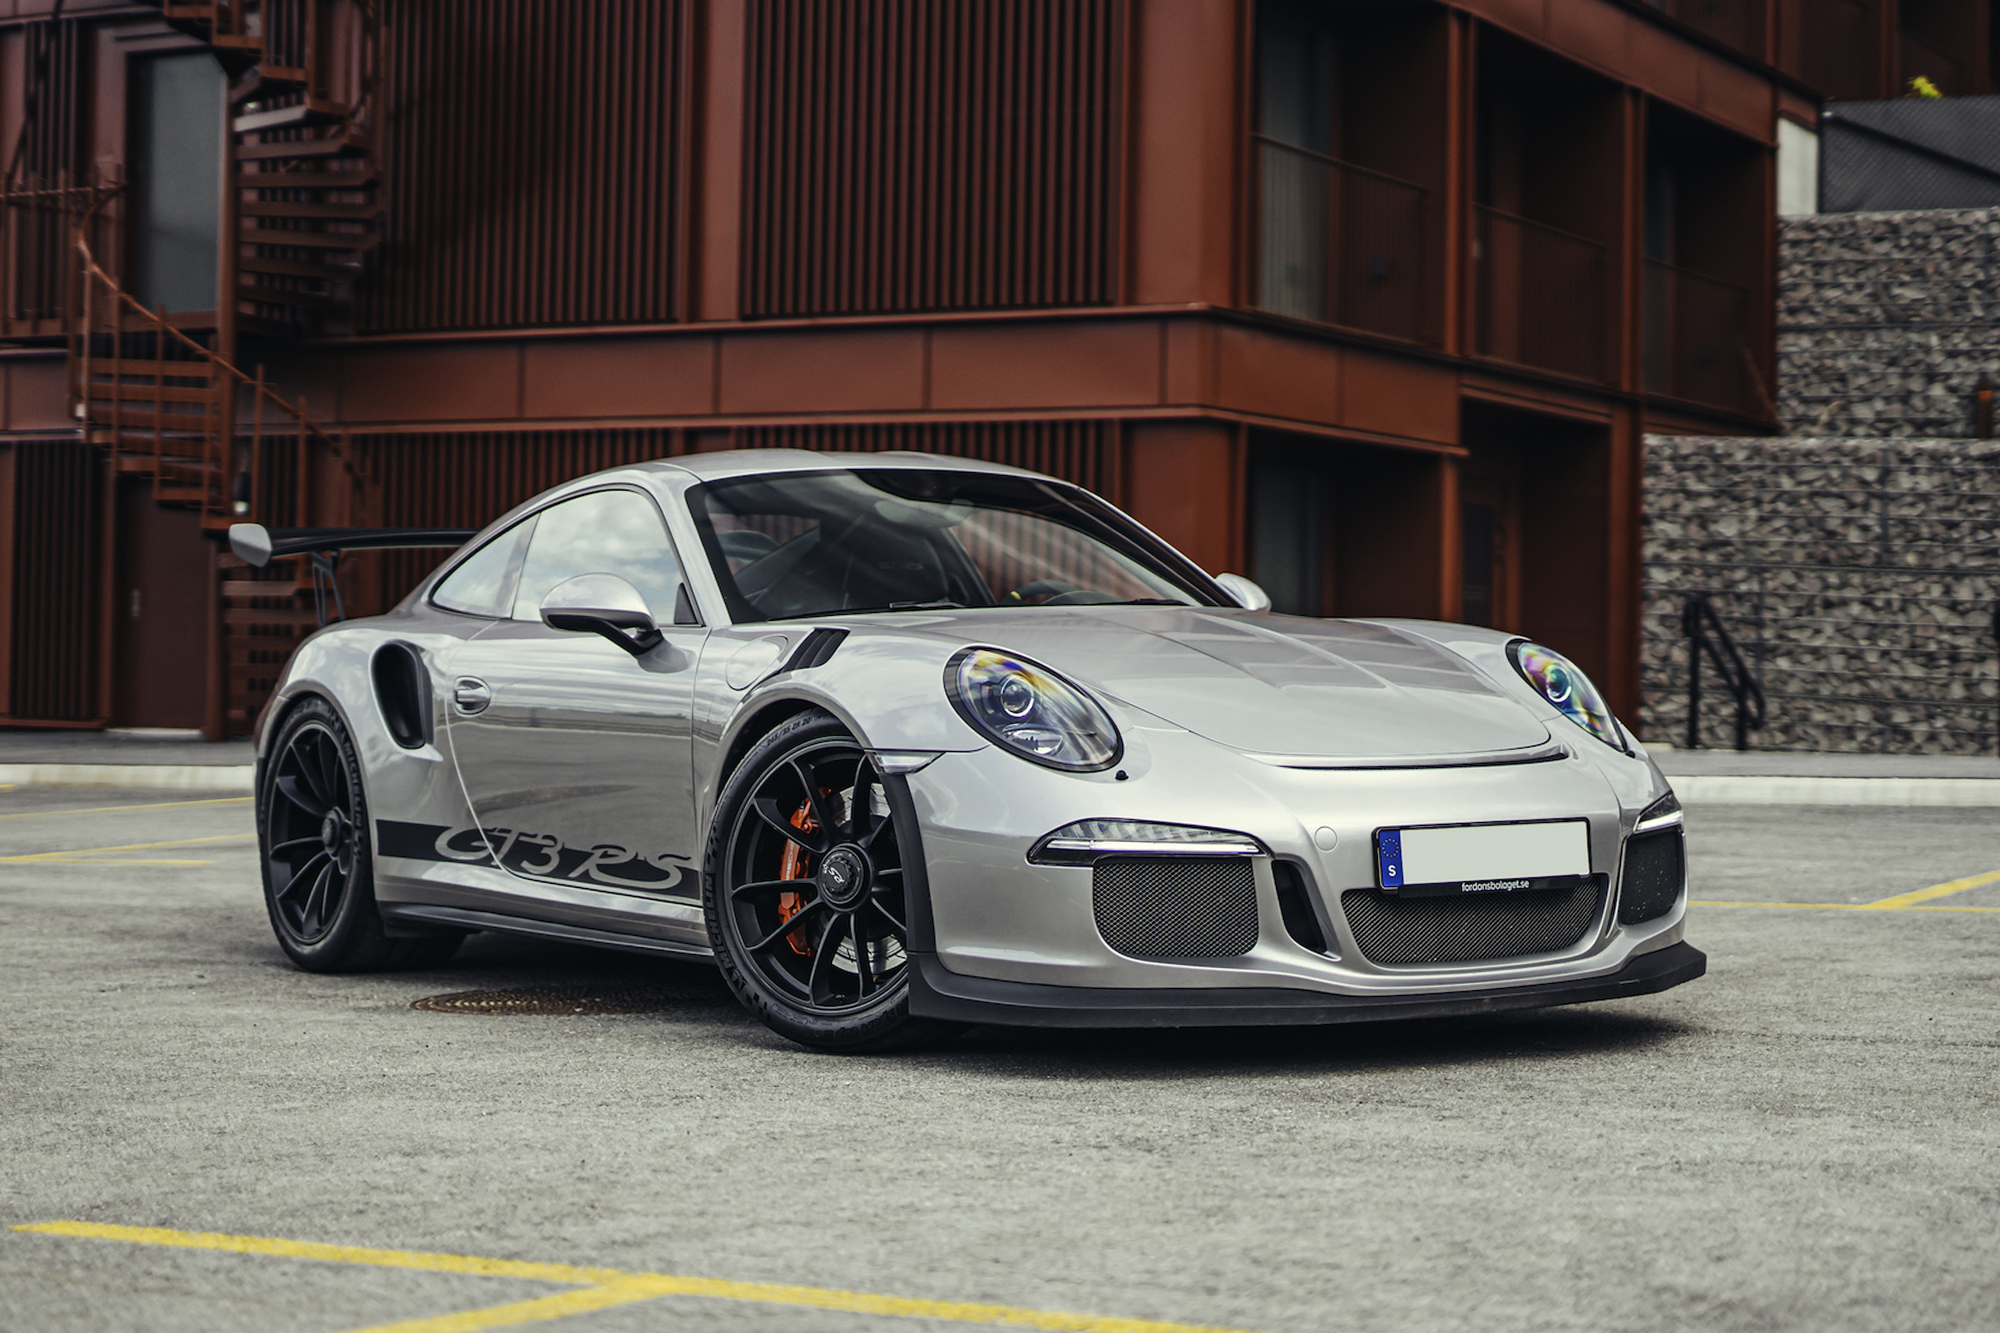 2016 PORSCHE 911 (991) GT3 RS for sale by auction in Stockholm, Sweden image